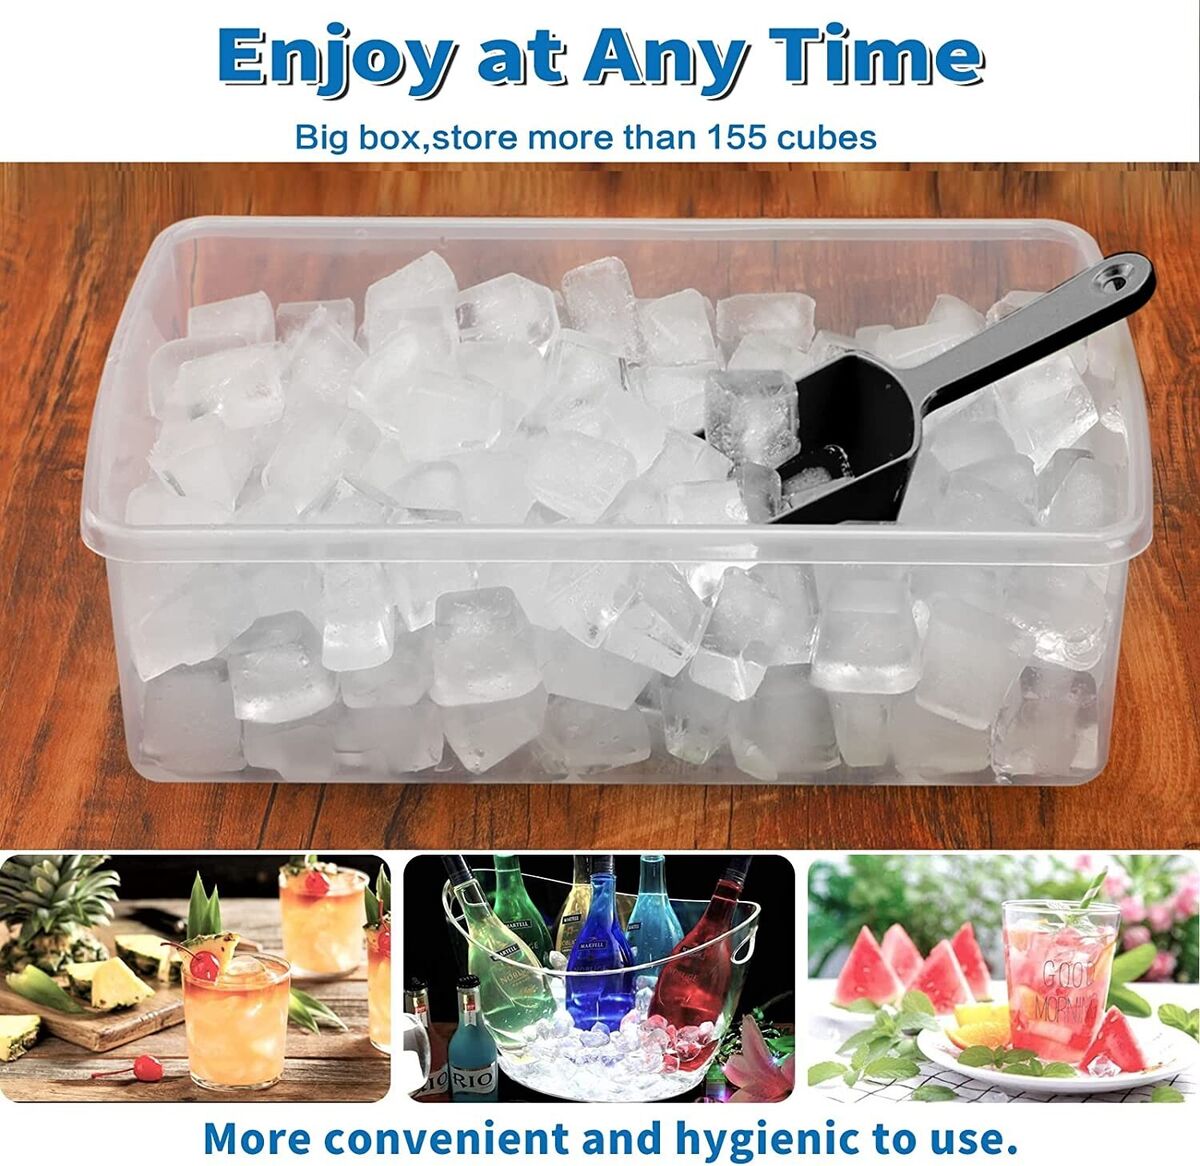 ARTLEO Ice Cube Tray with Lid and Storage Bin for Freezer, Easy-Release 55 Mini Nugget Ice Tray with Spill-Resistant Cover, Container, Scoop, Flexible